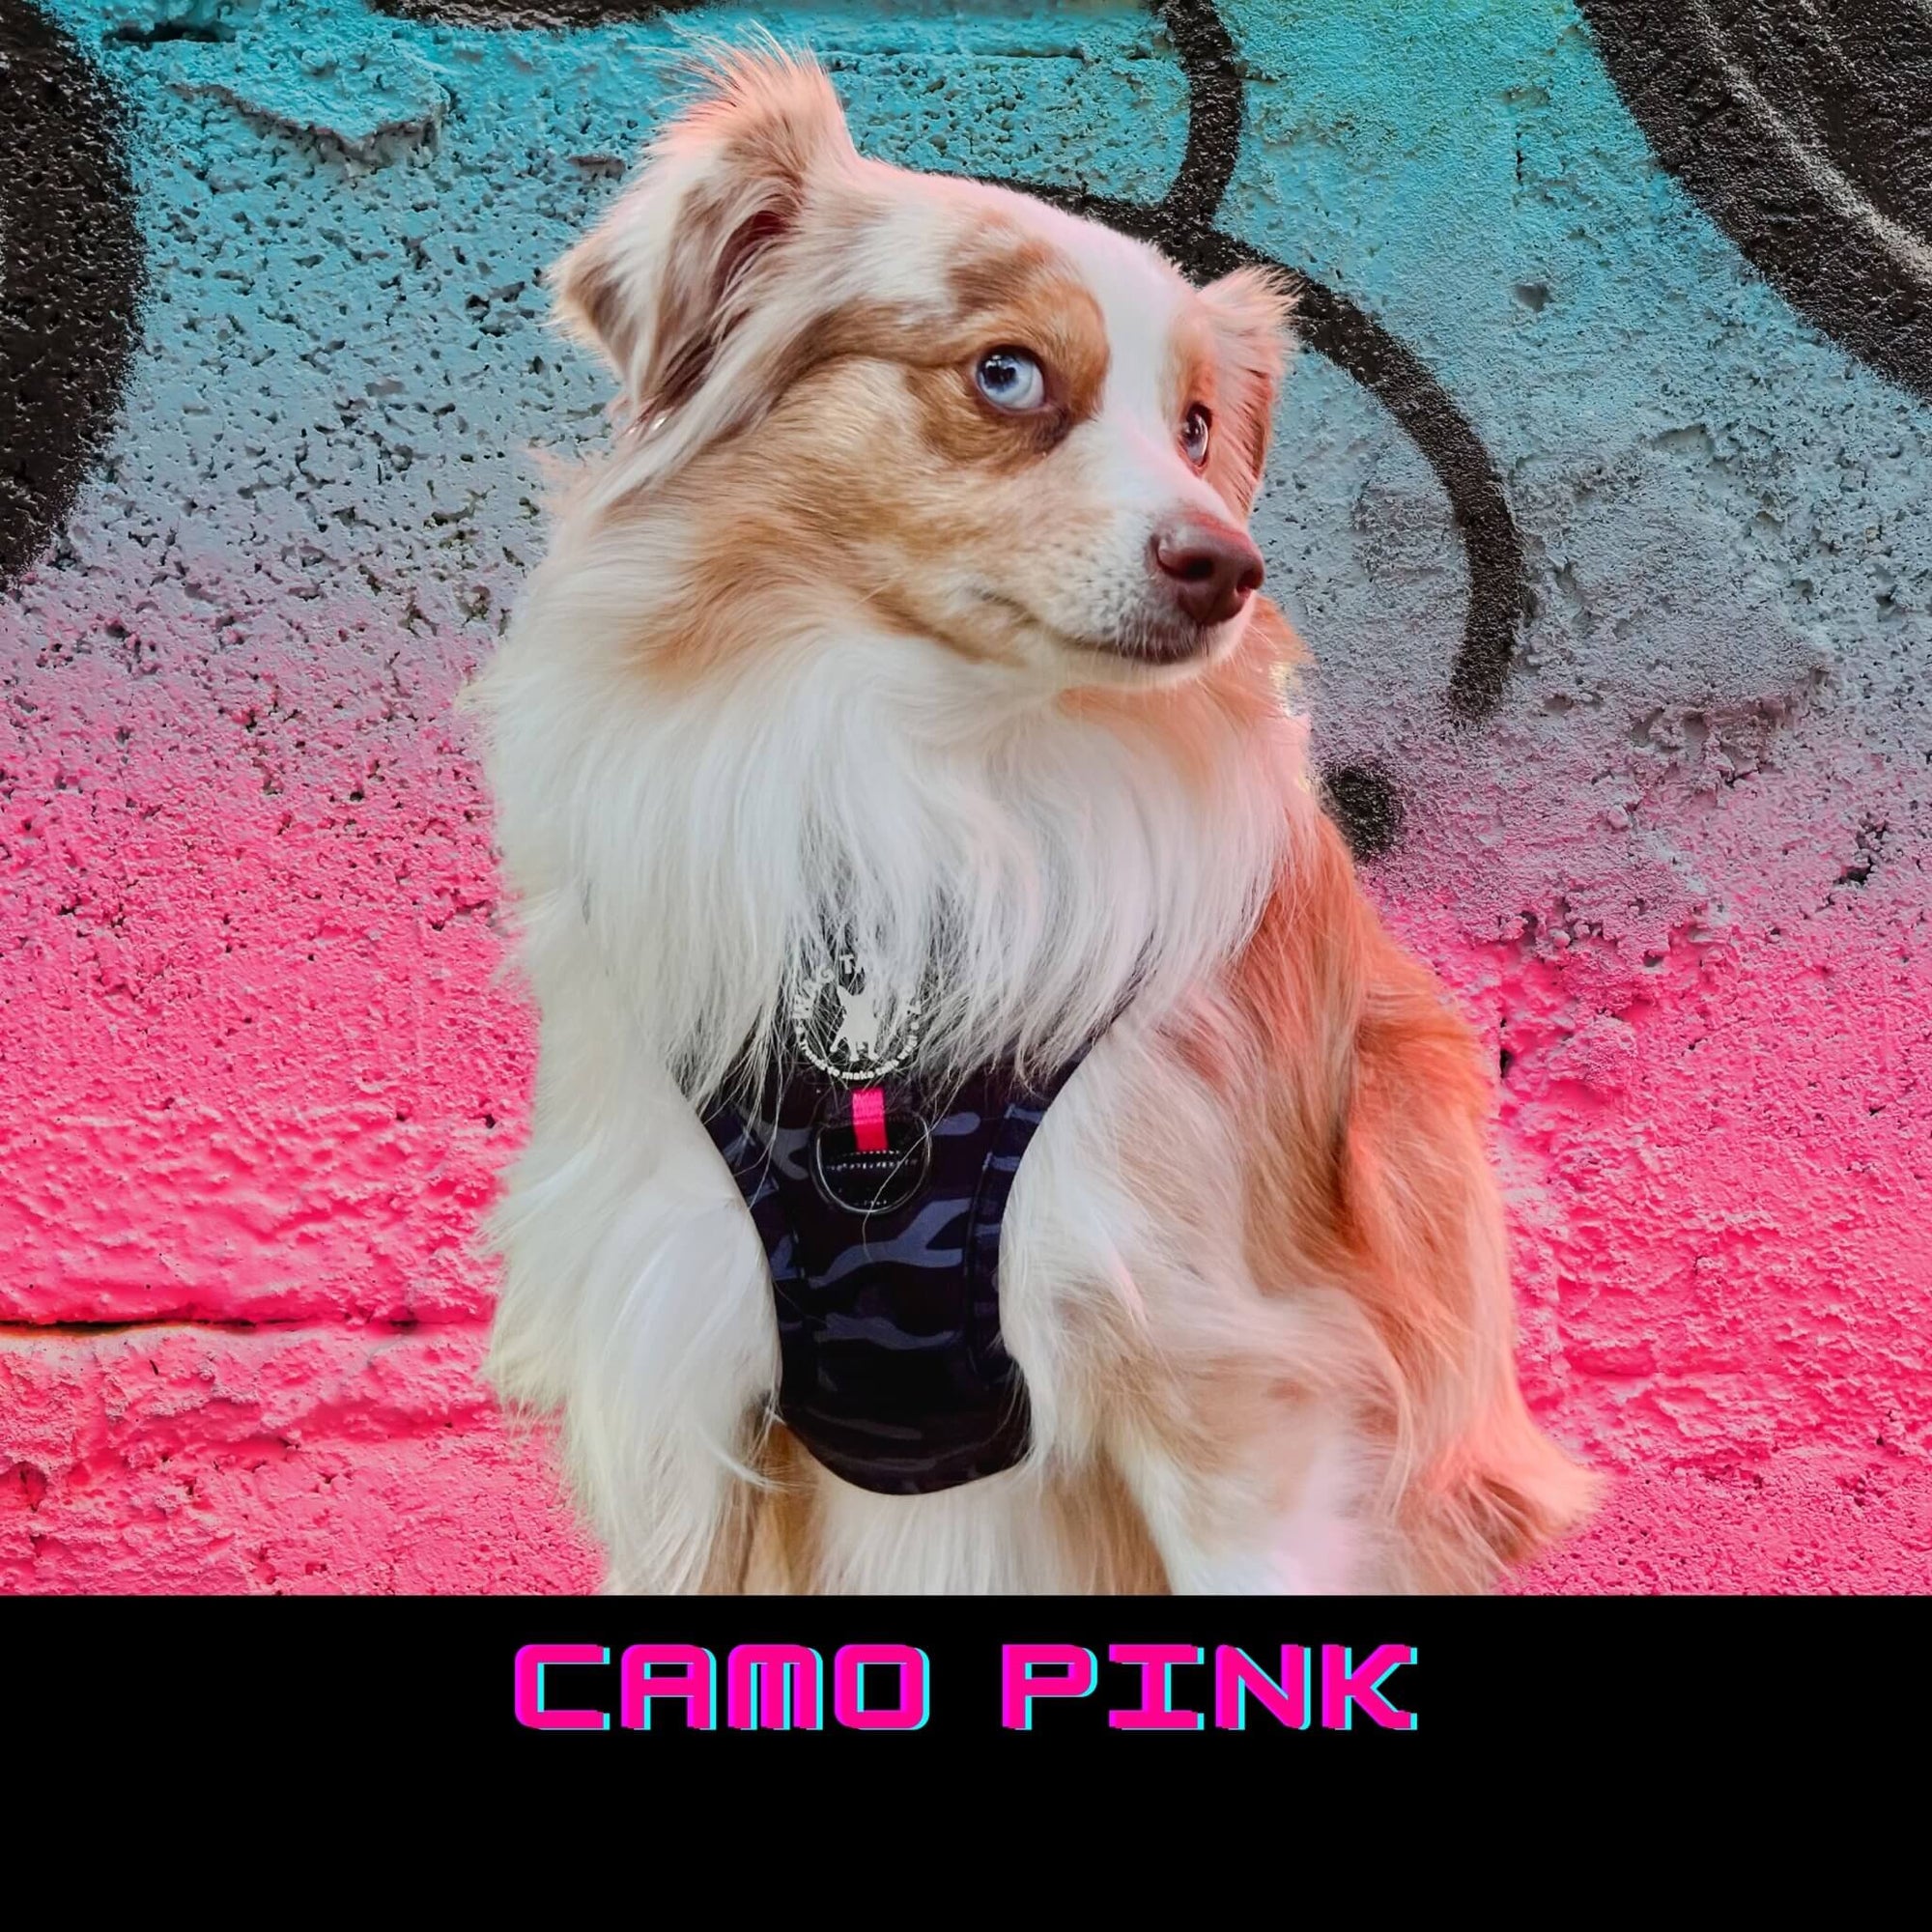 No Pull Dog Harness in Camo Pink worn by Mini Australian Shepherd against pink and teal graffiti background